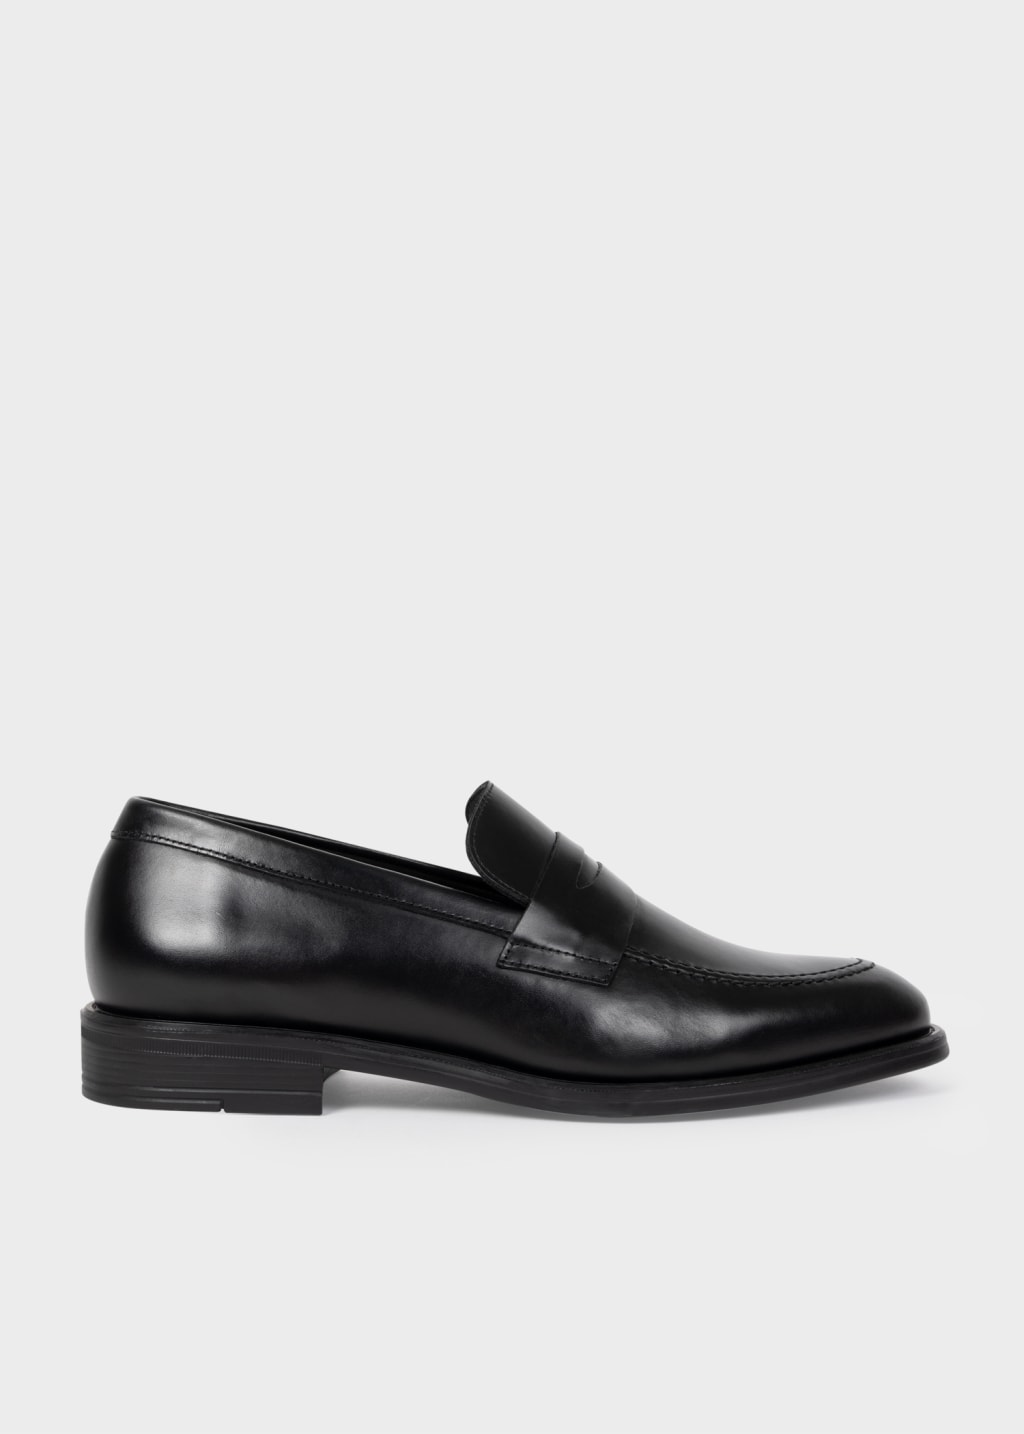 Detail View - Black Leather 'Remi' Loafers Paul Smith